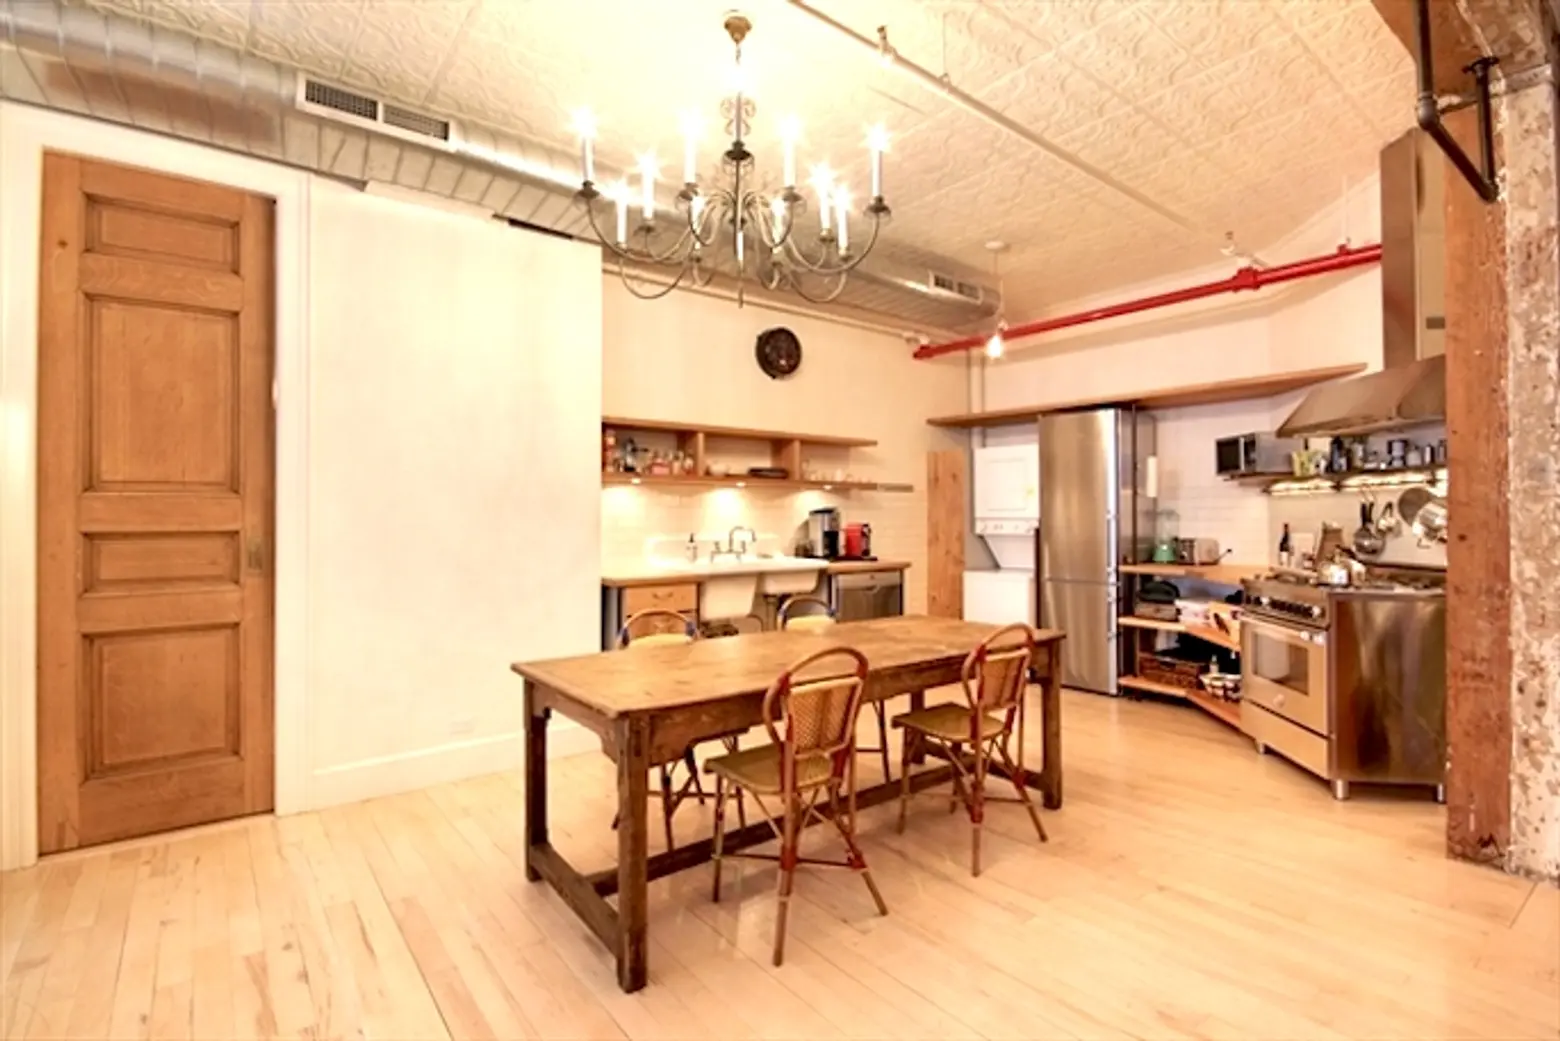 136 West 24th Street, renovated loft with flexible layout, exposed brick and original details